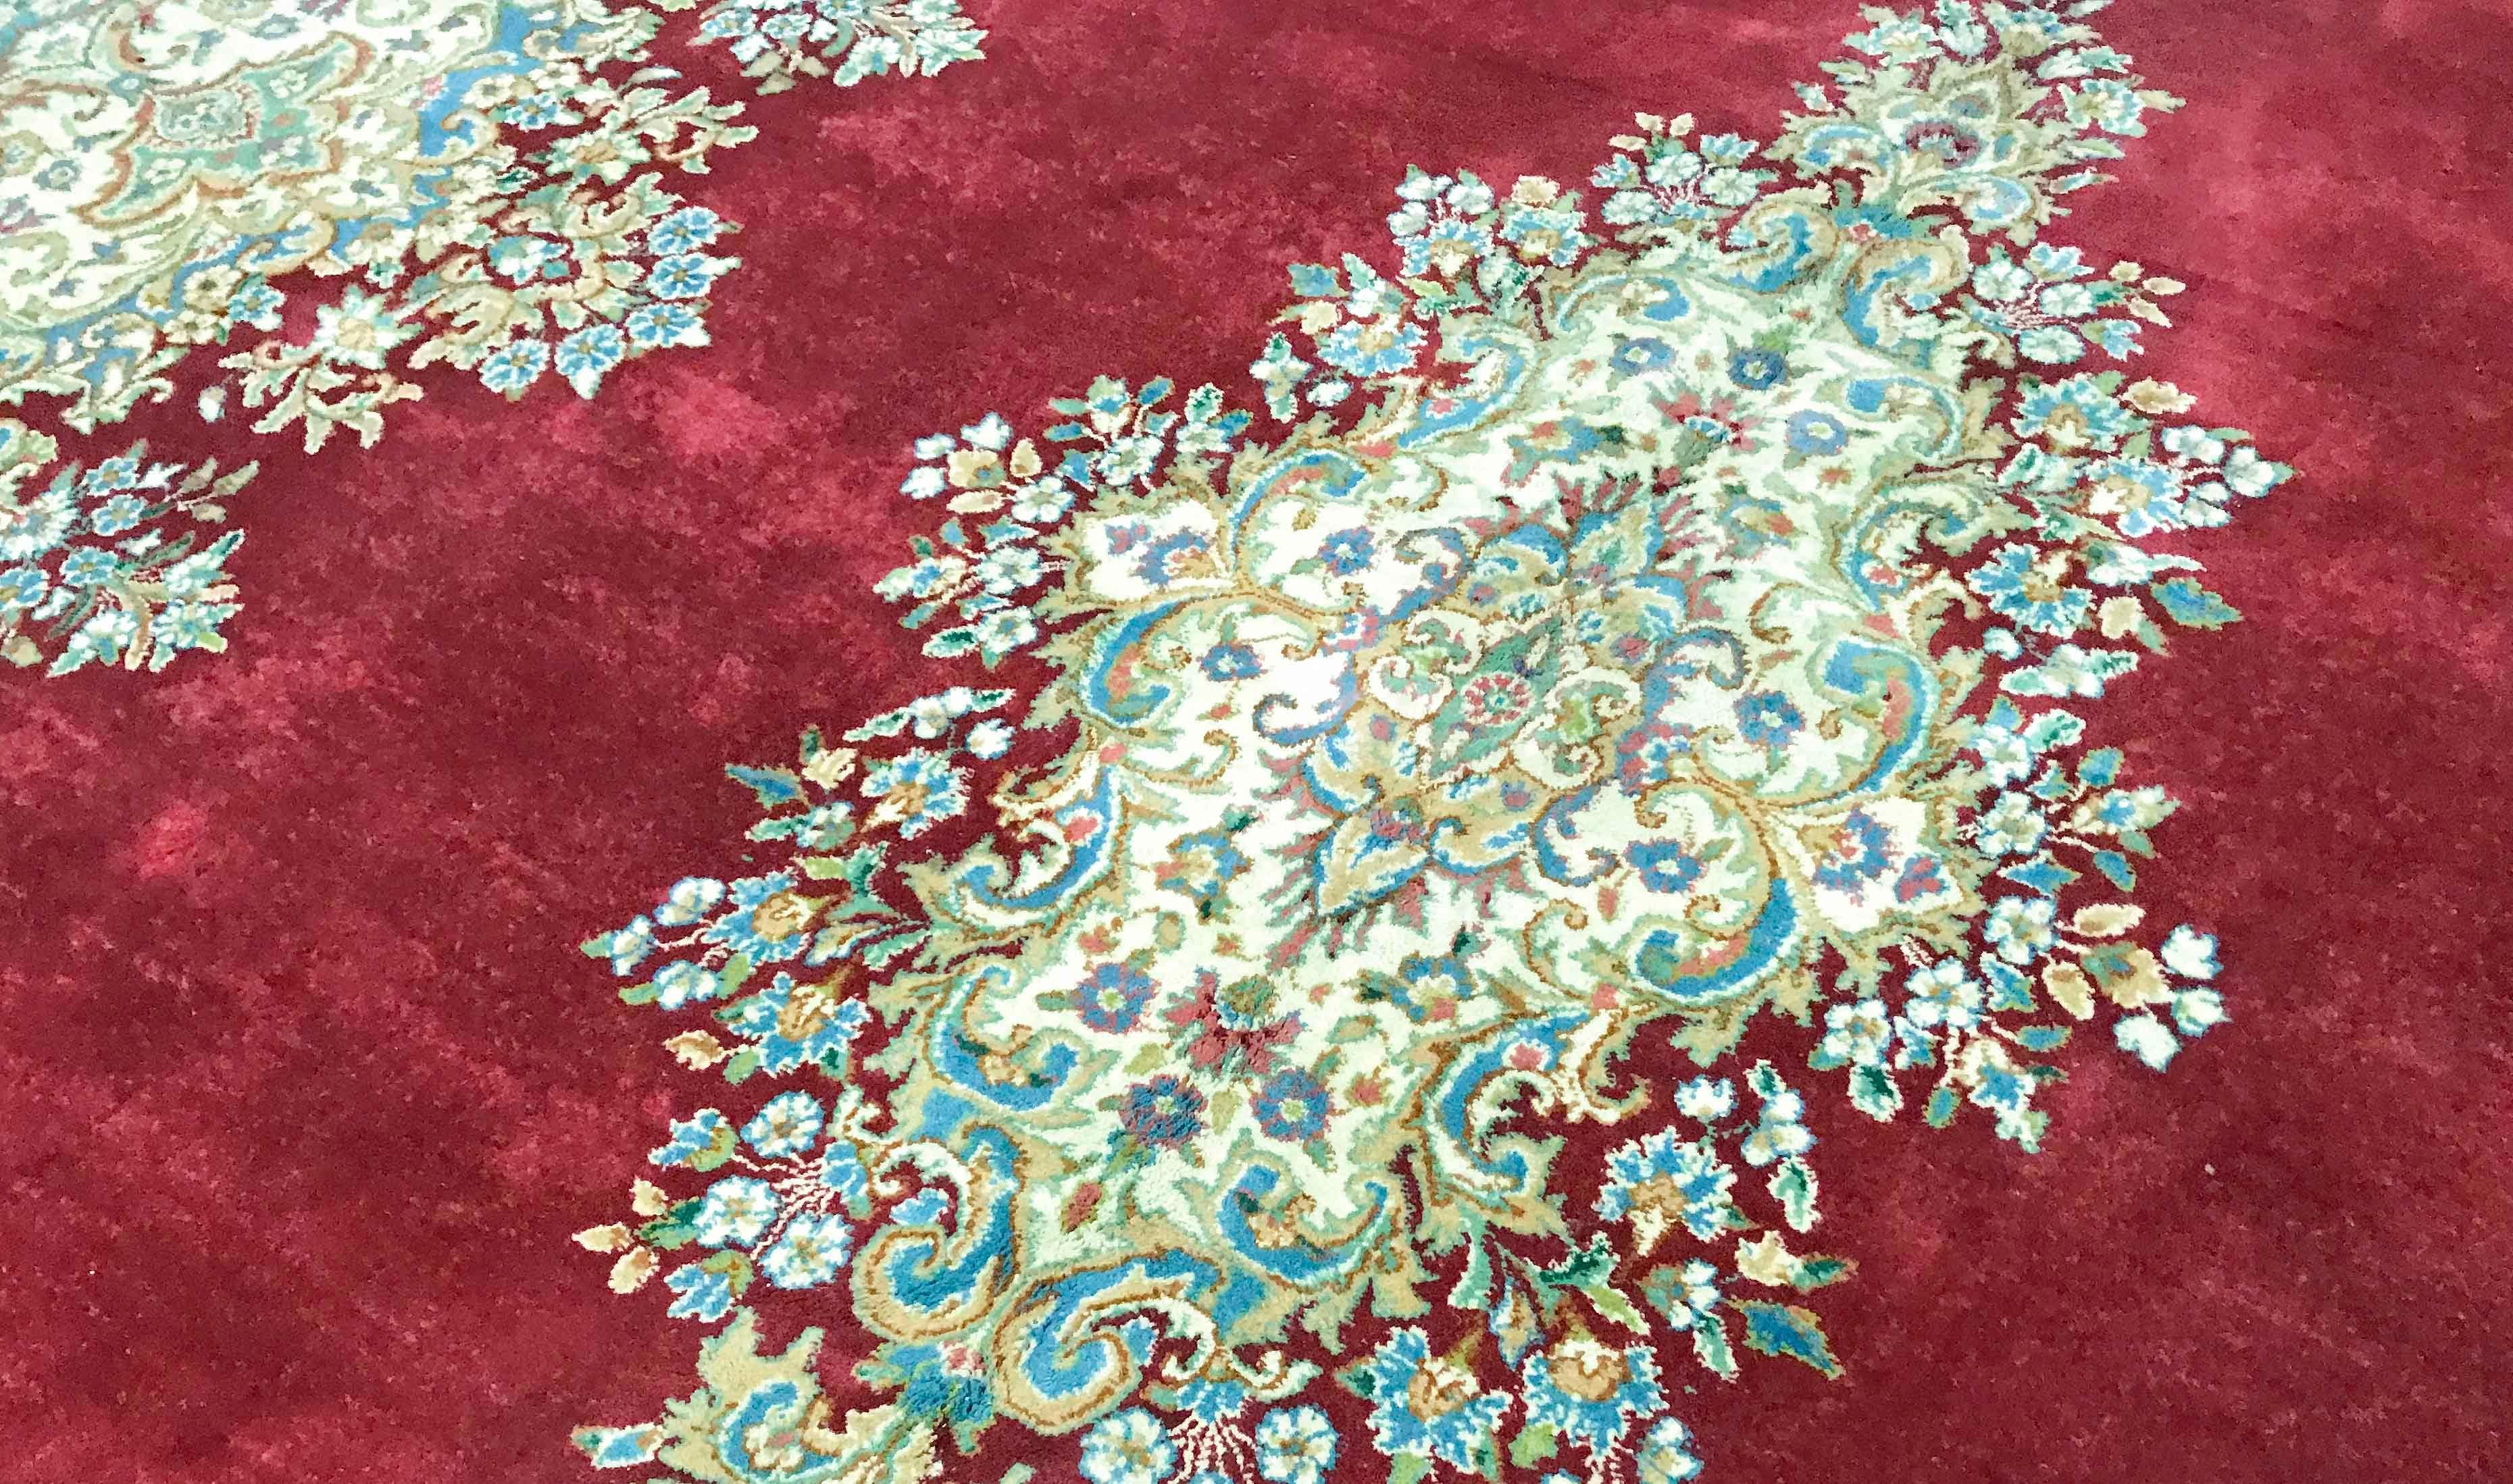 Vintage Persian Kerman rug circa 1940. The plain red filled encompassing the central medallion, filled to bursting with flowers, all enclosed by a border and corners, repeating the floral style, give a wonderful look that will create an amazing